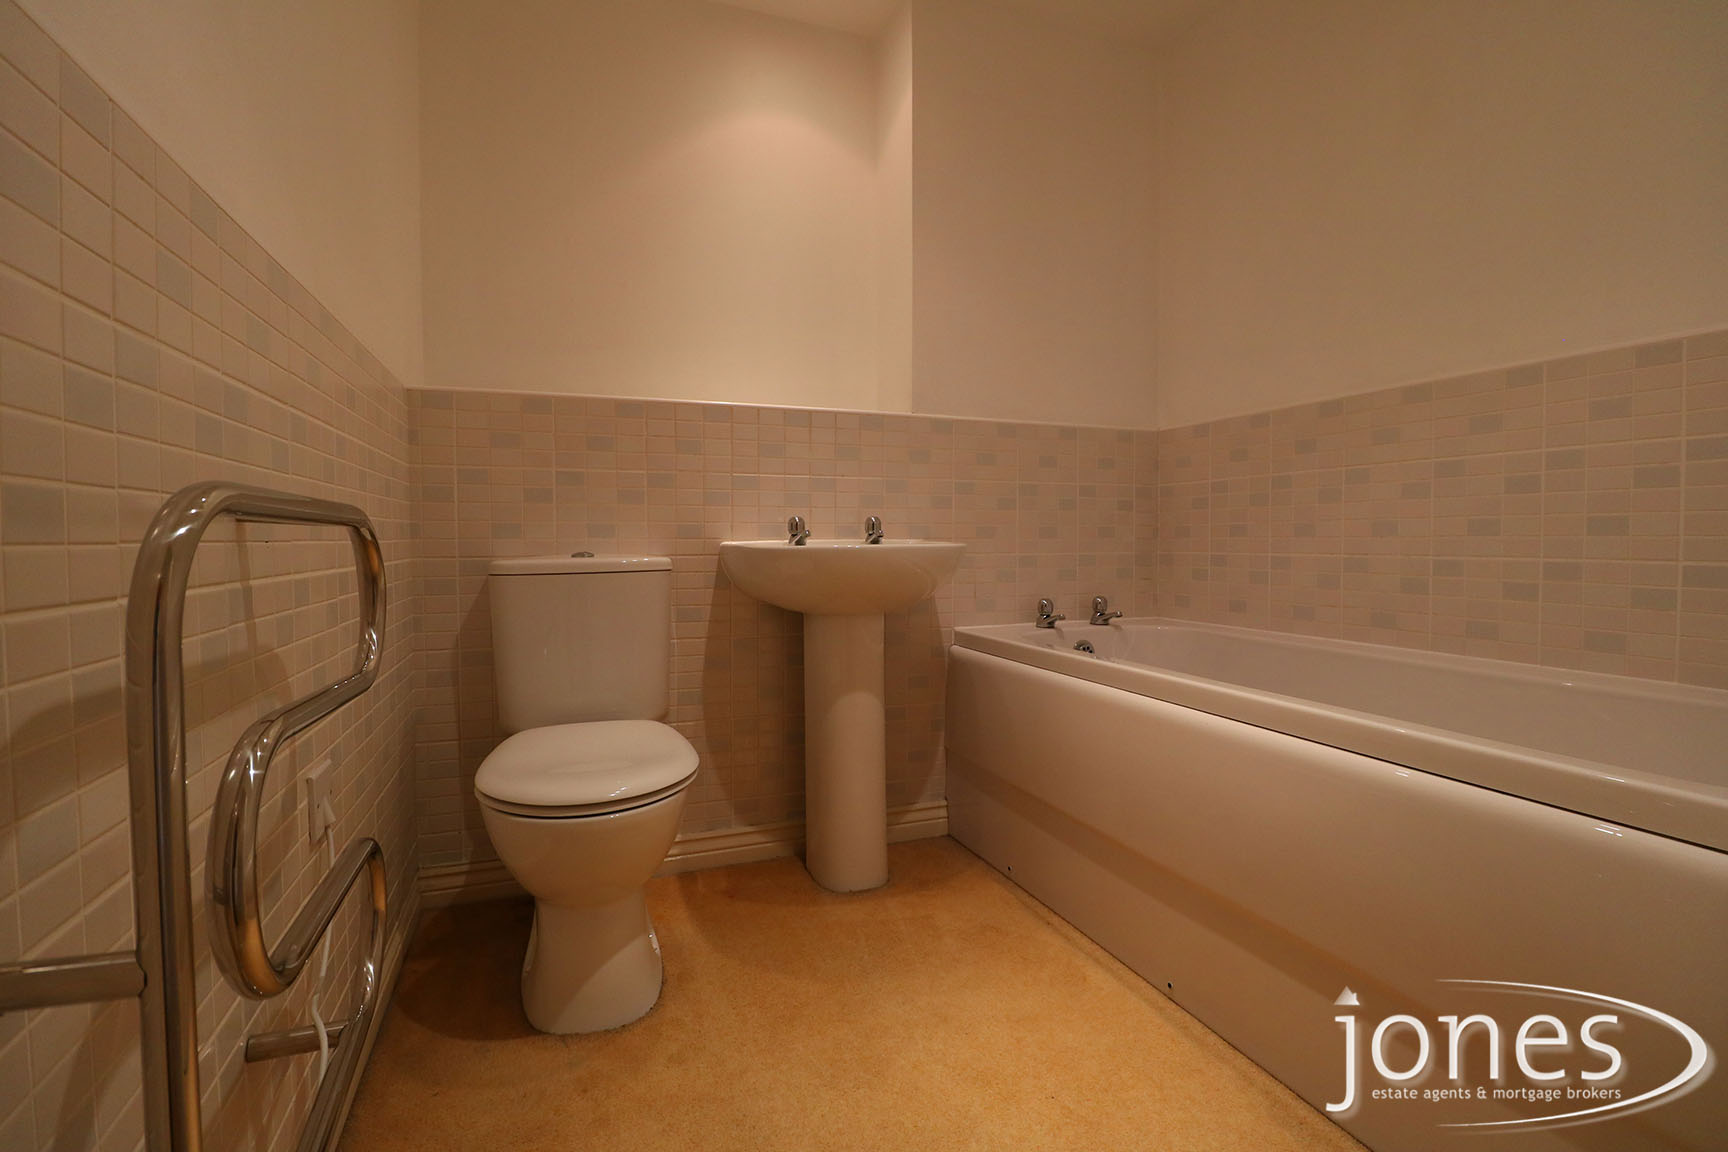 Home for Sale Let - Photo 07 Lowther Drive, Darlington, DL1 4LZ